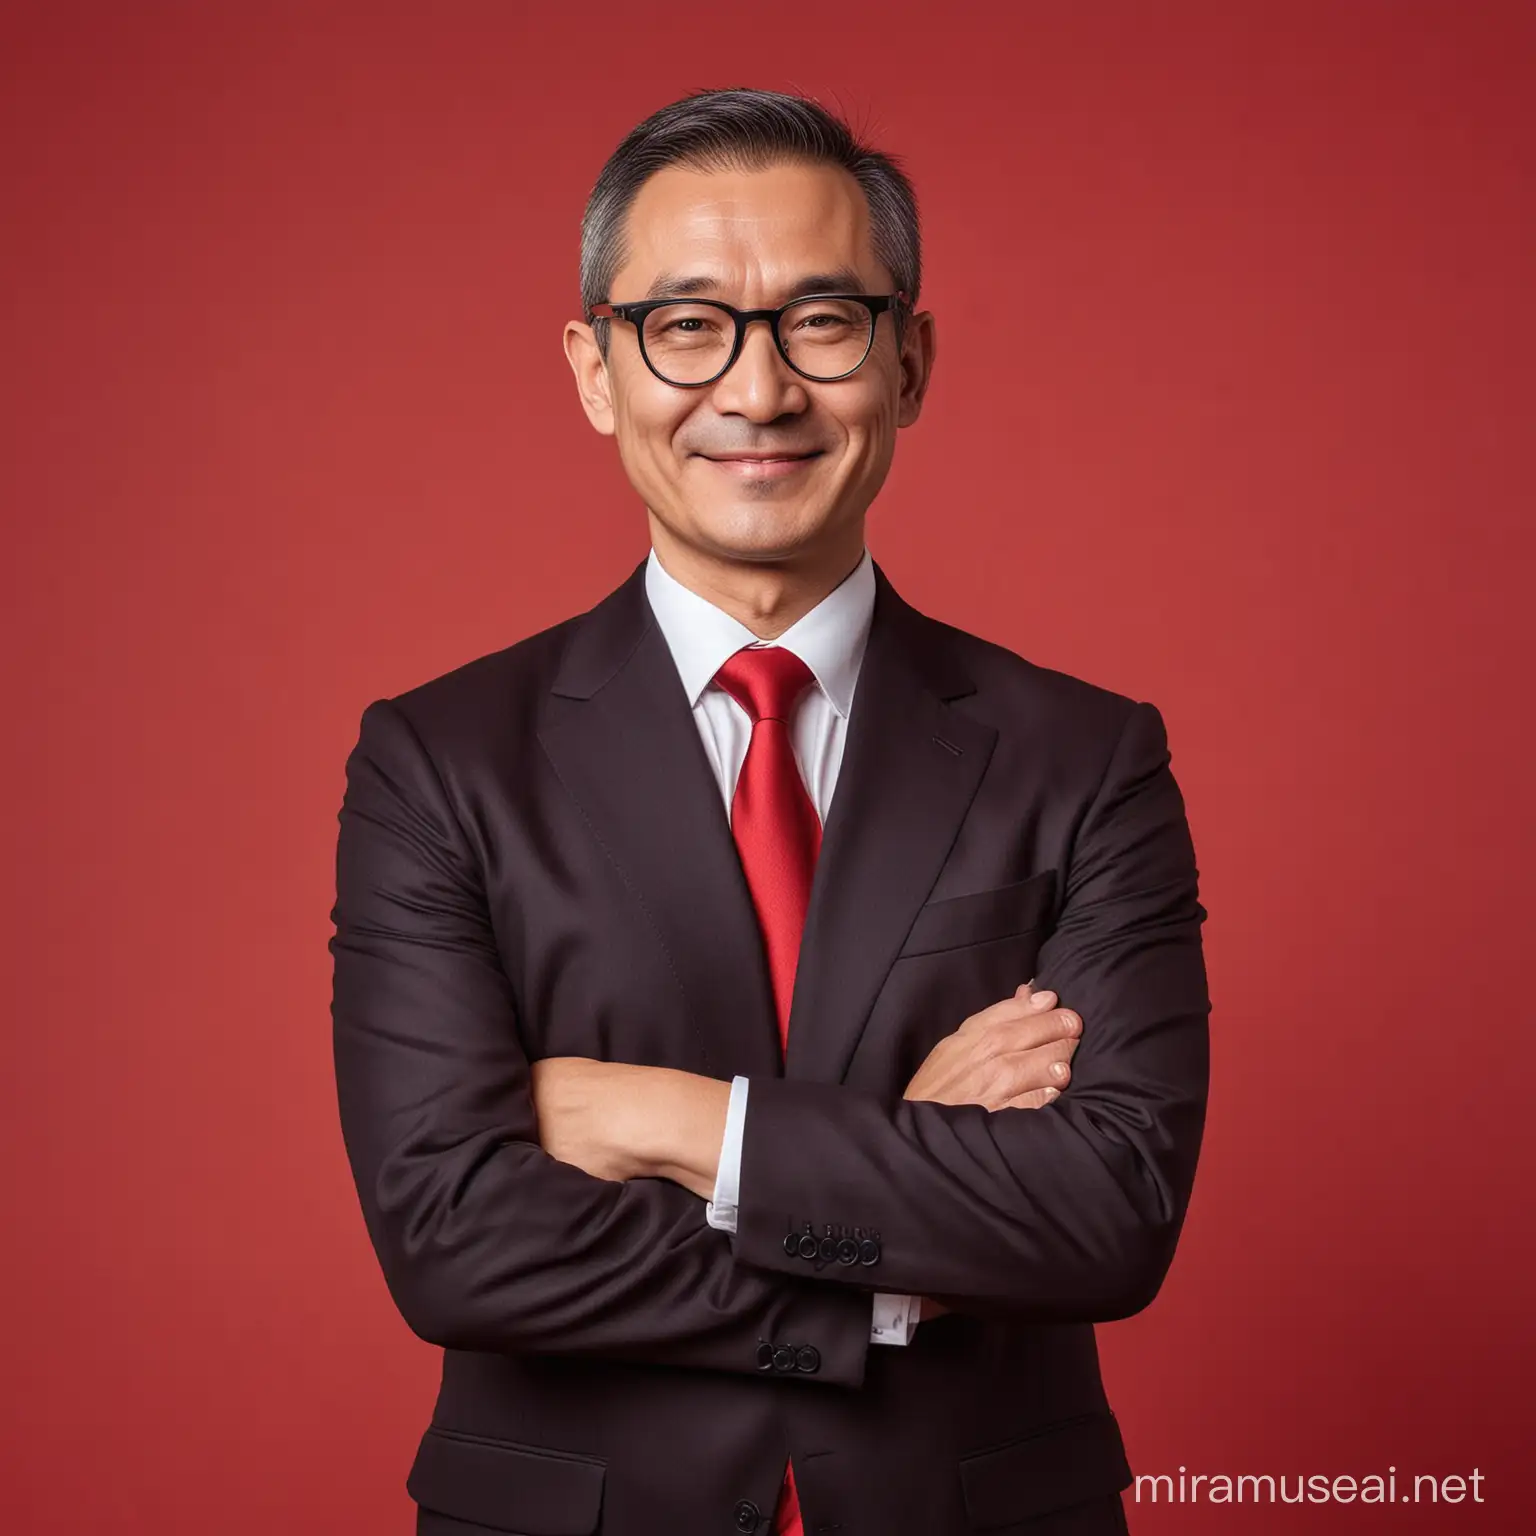 RussianChinese Fusion 50YearOld Presidential Figure with Round Glasses and Red Background